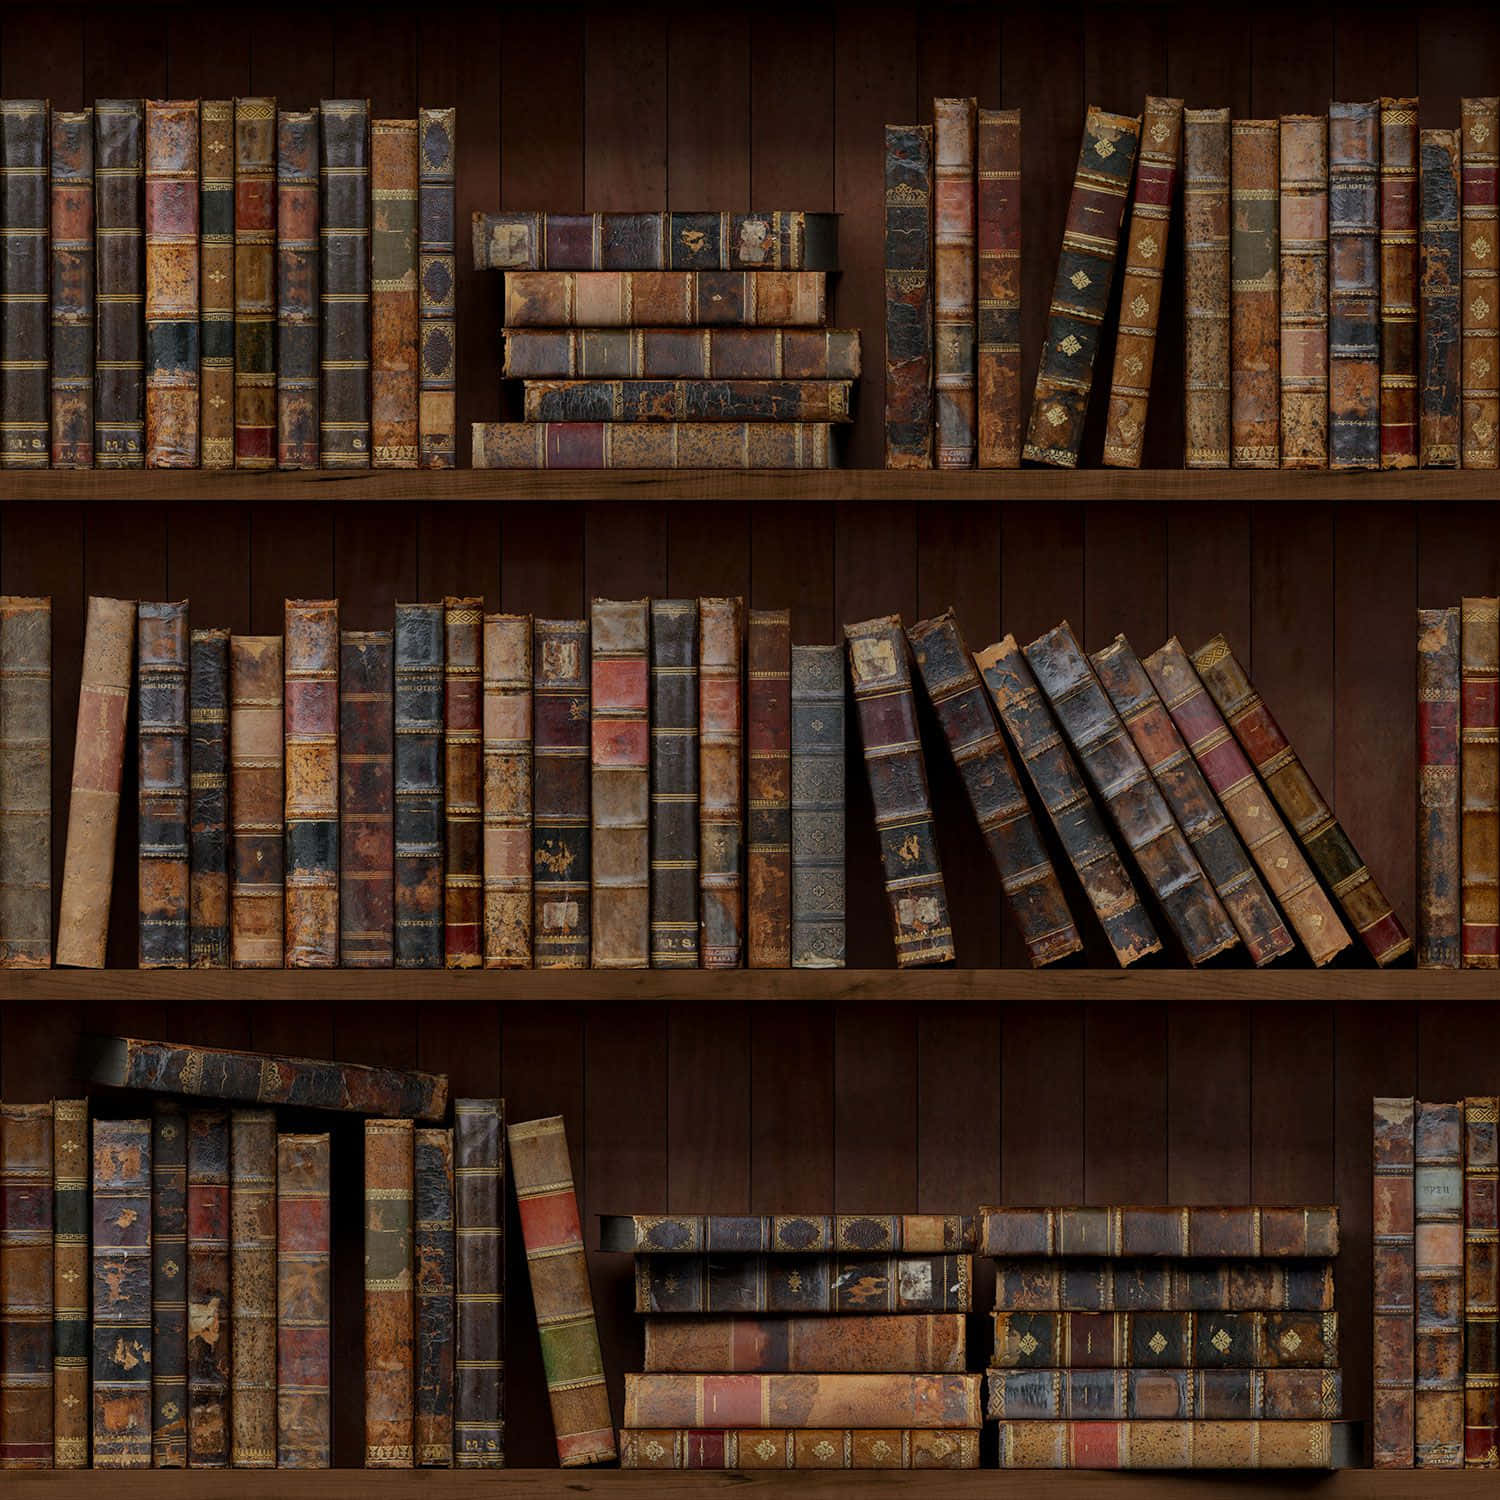 A Book Shelf With Many Old Books On It